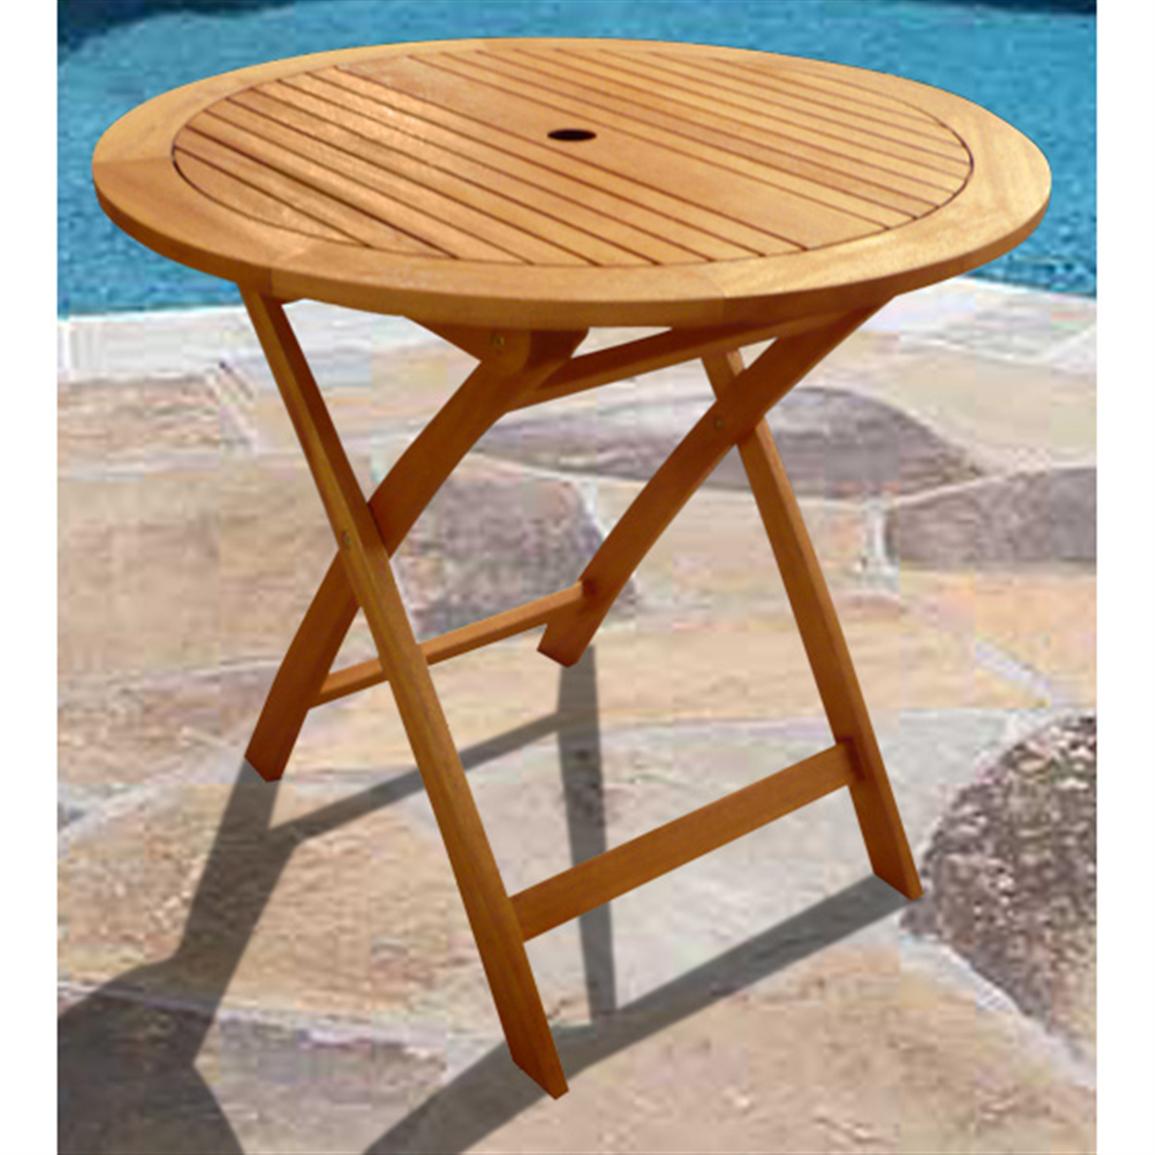 VIFAH® Round Outdoor Wood Folding Table - 218660, Patio Furniture at